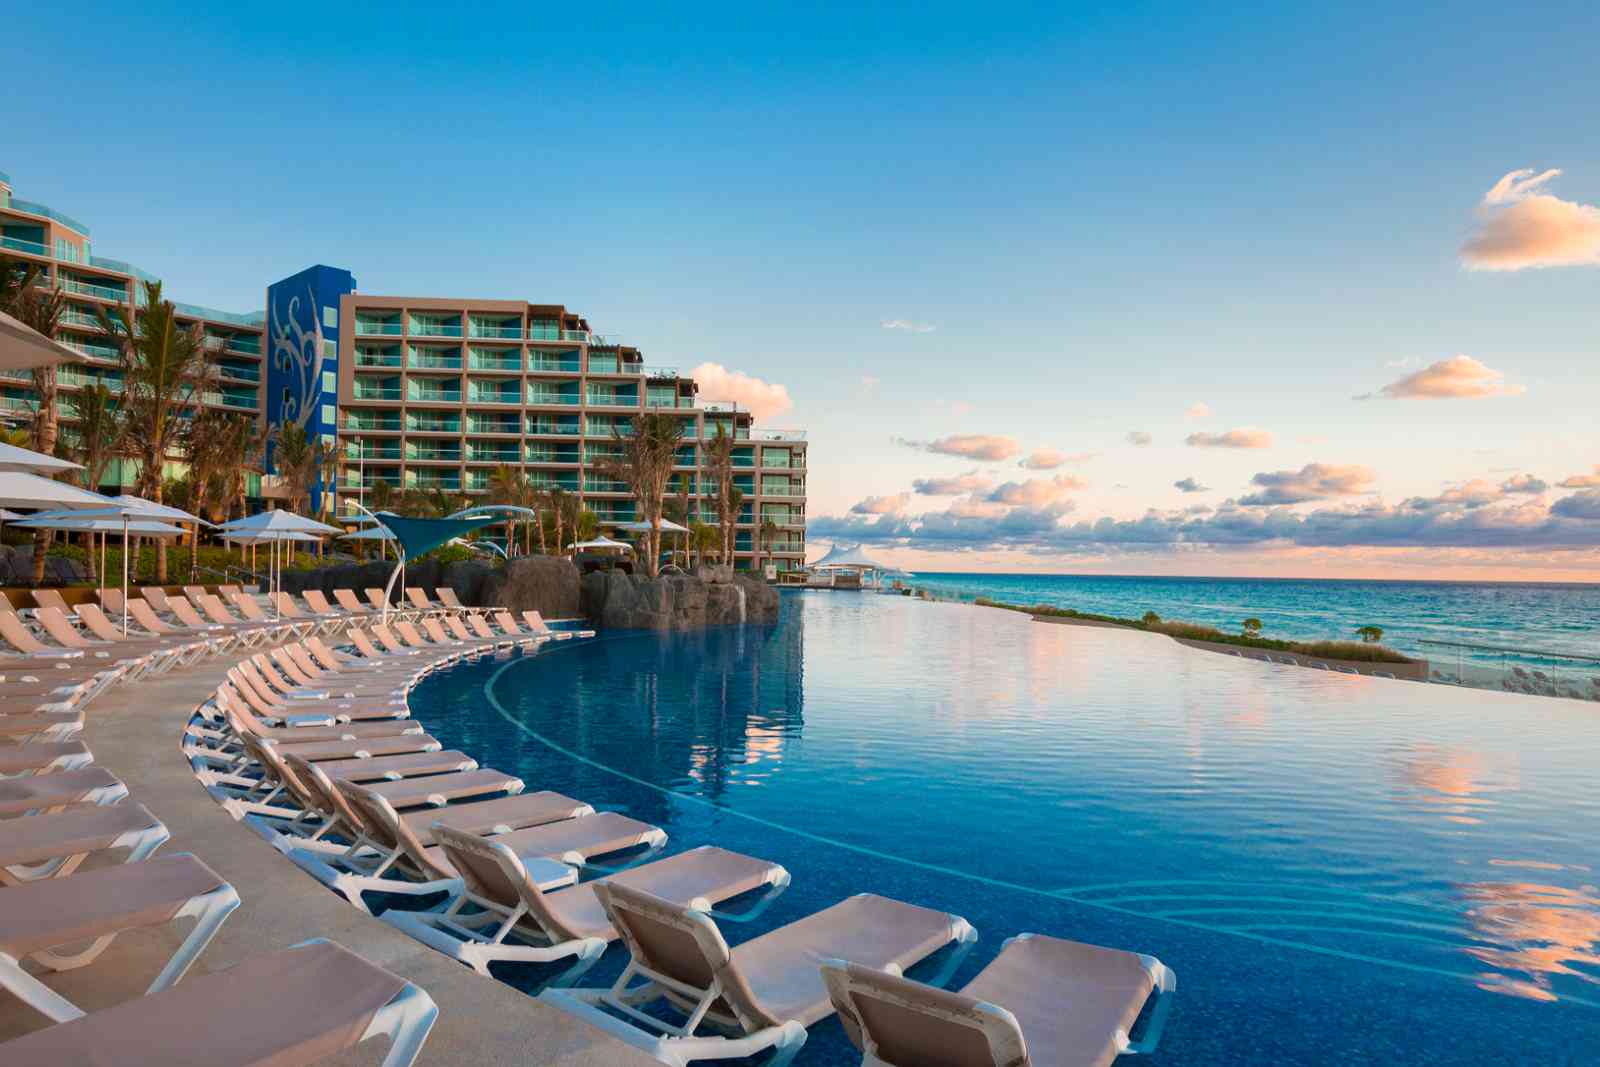 Beat the Cold & Head to Cancun's Hard Rock Hotel This Winter